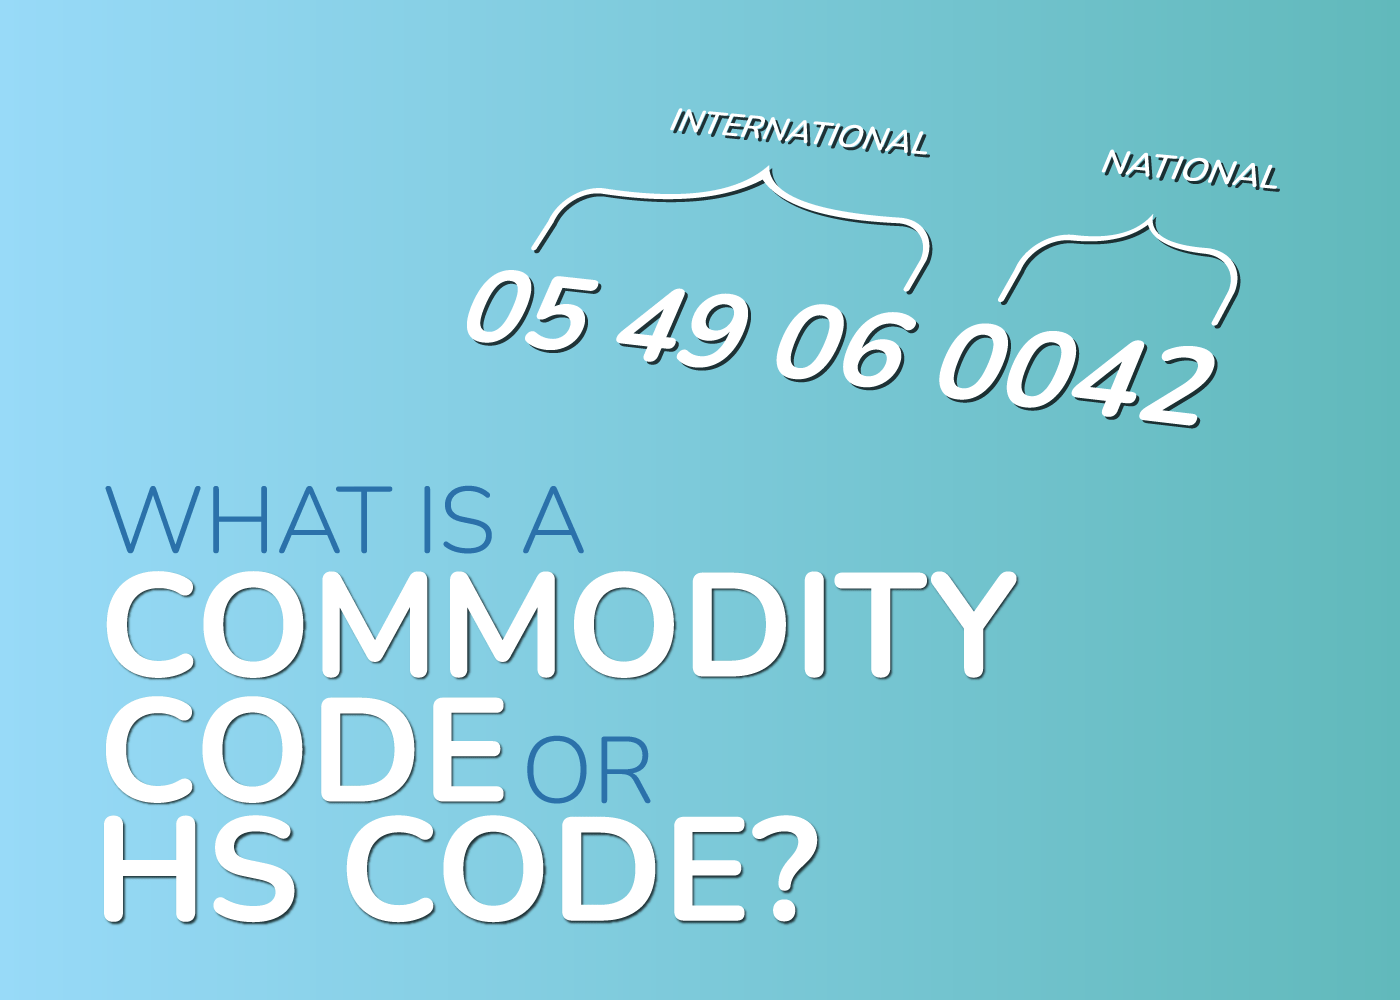 Commodity Code or HS Code